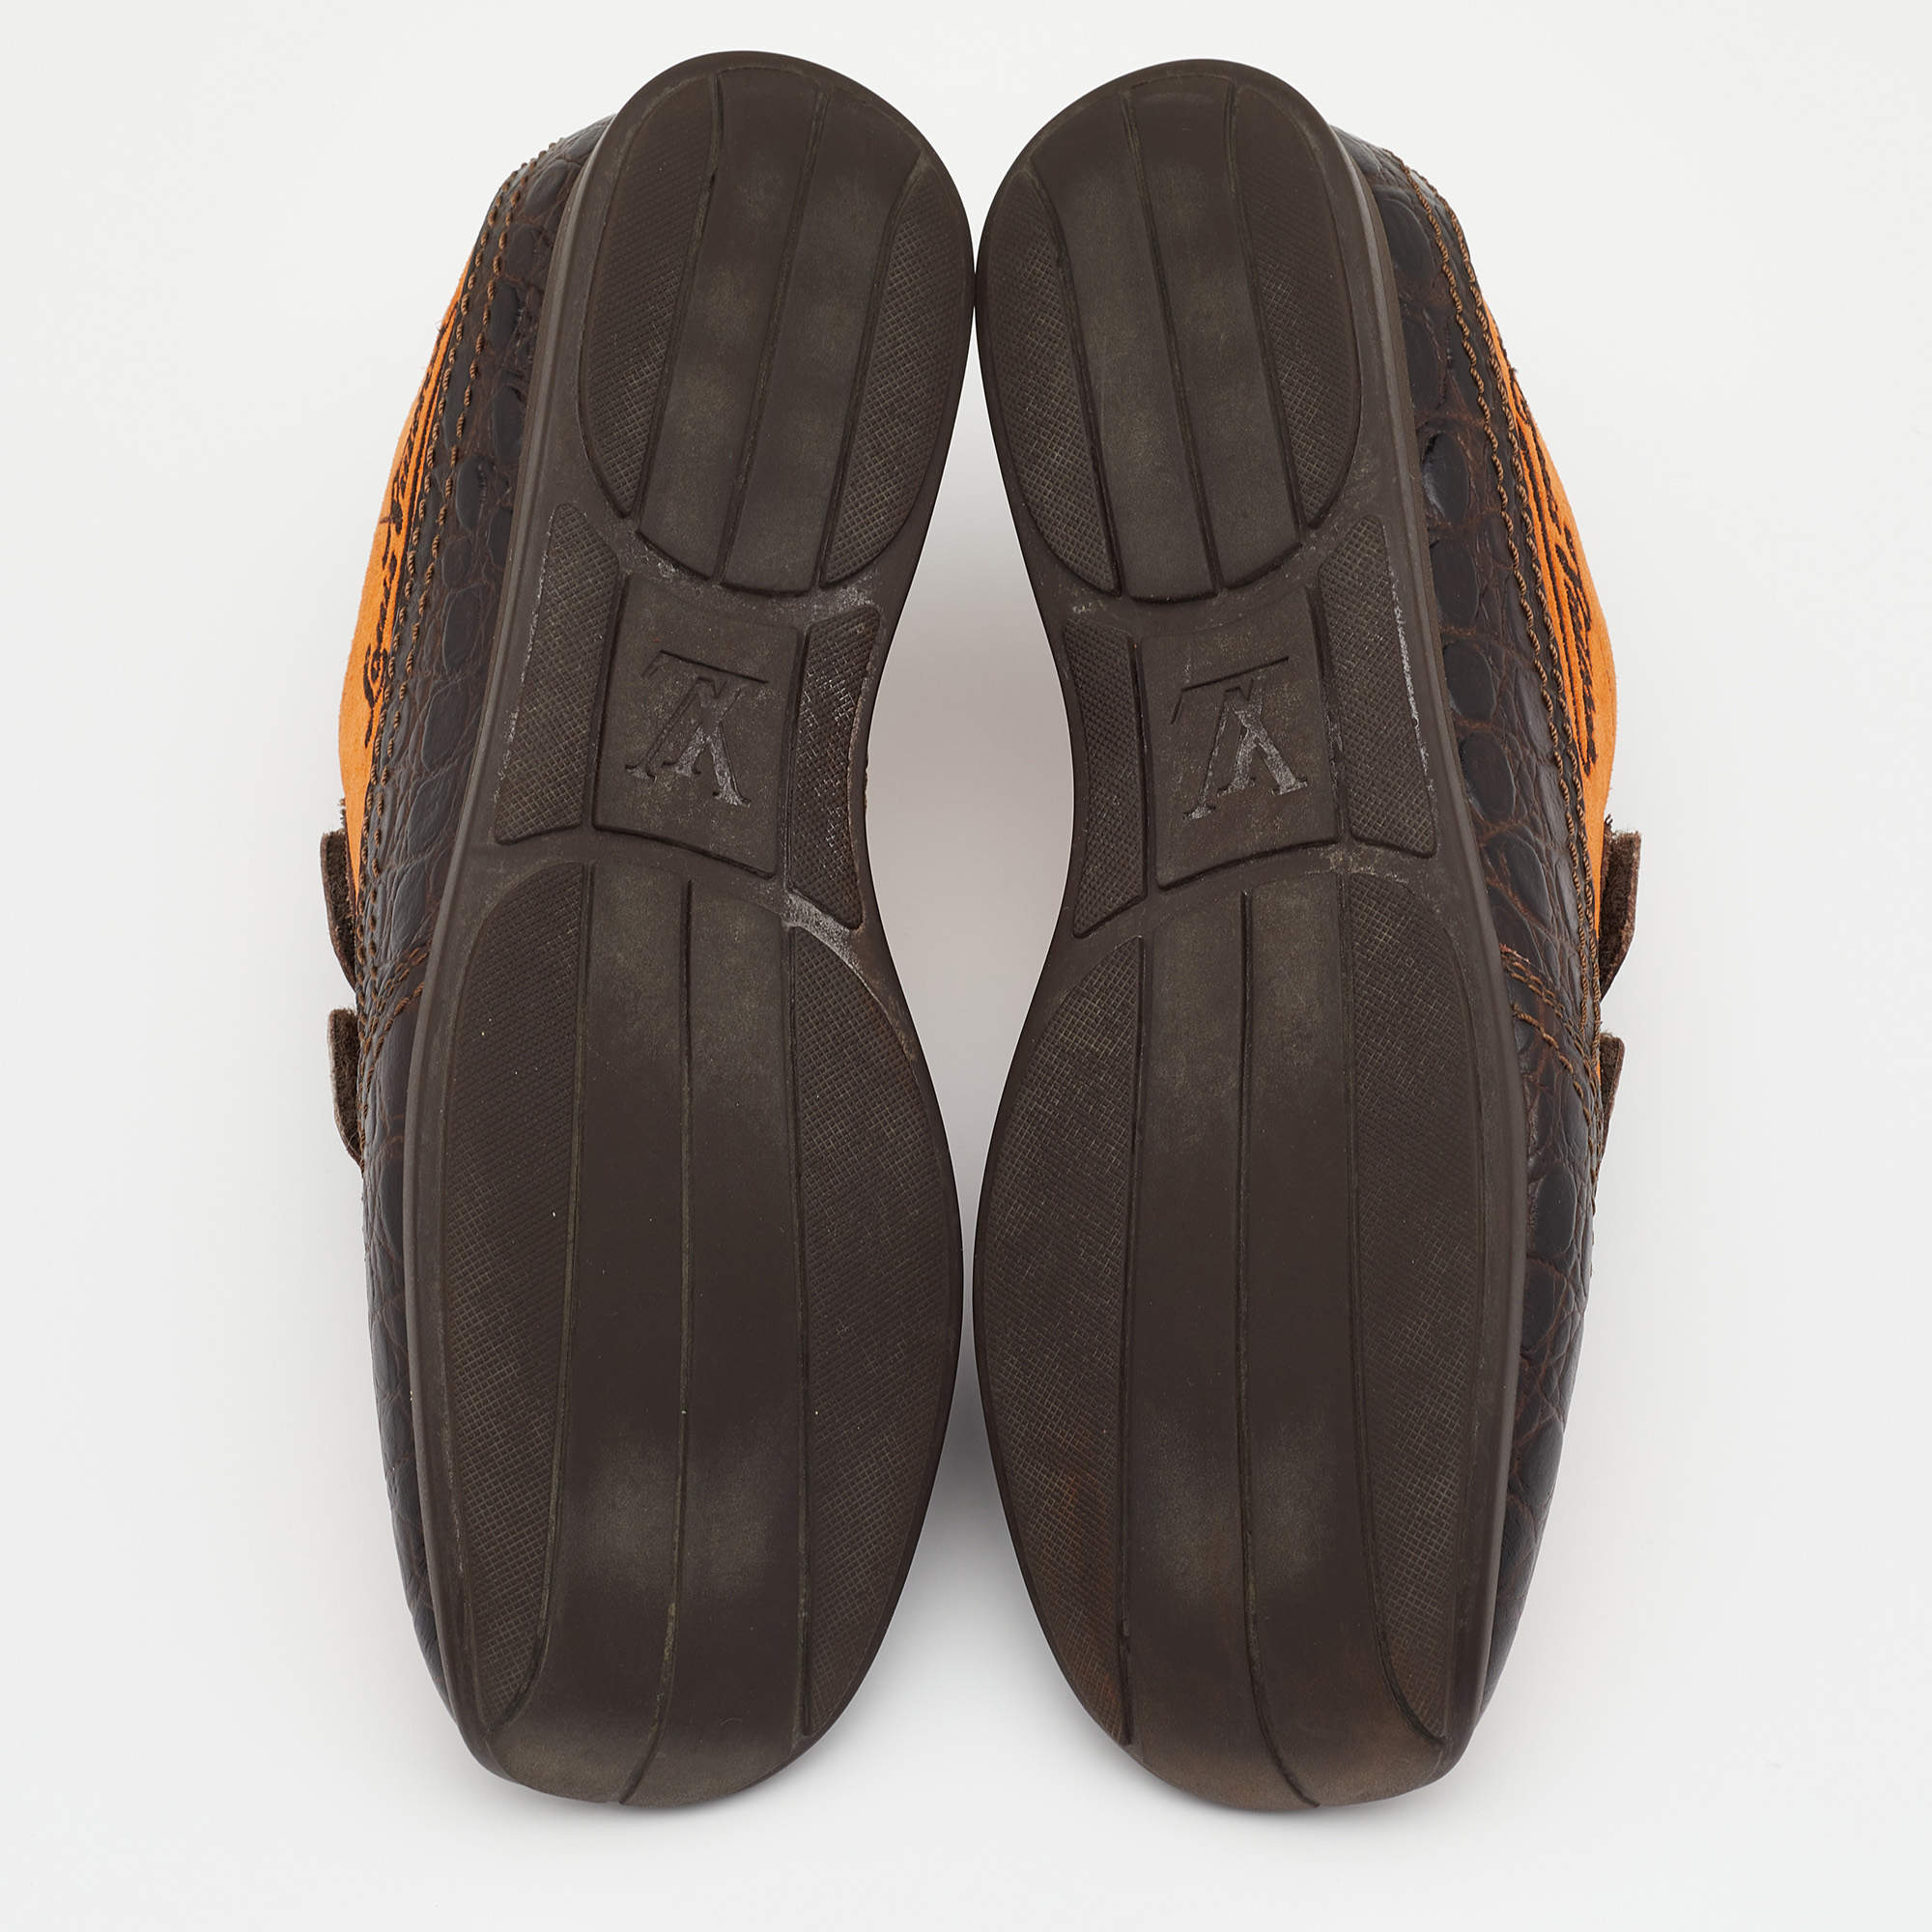 Louis Vuitton Dark Brown/Orange Crocodile Leather And Suede Low Top Sneakers  Size 36 Louis Vuitton